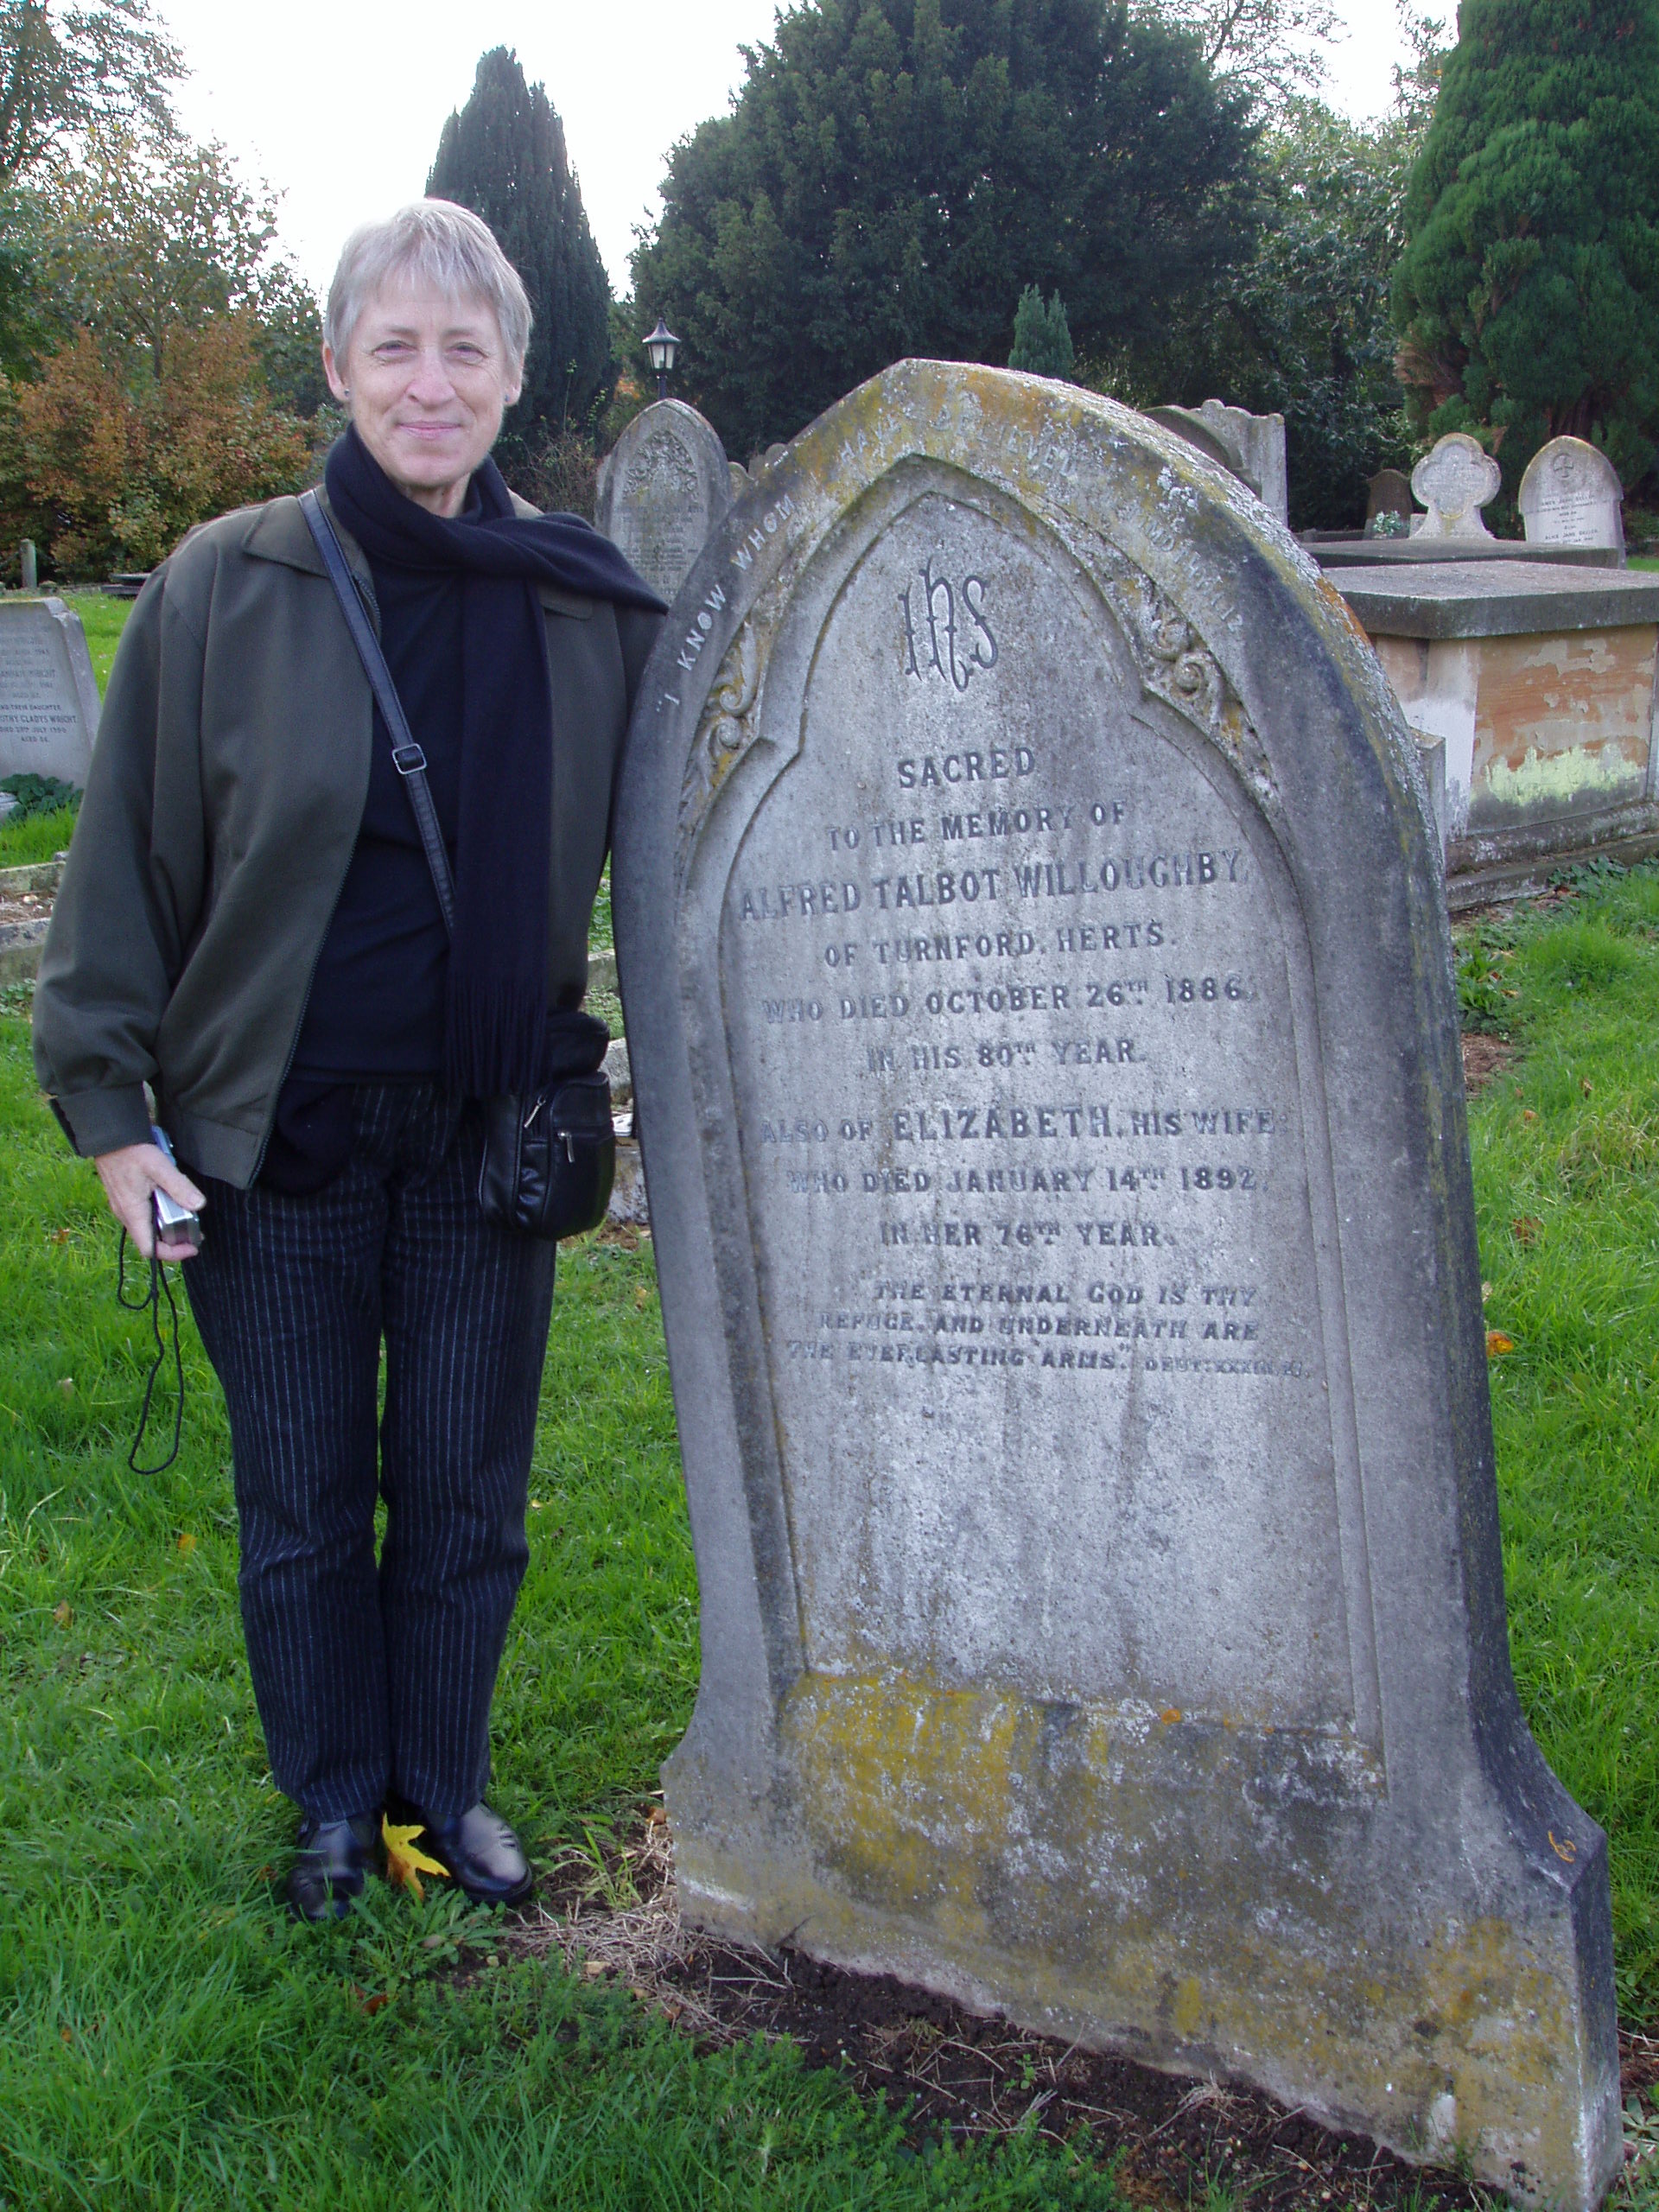 The author checks a source for death information: the gravestone of her maternal great-great-grandparents, Elizabeth and Alfred Talbot WILLOUGHBY in the Wormley Churchyard, Hertfordshire, England, on 4 November 2005. Photo: T.L., used with permission.